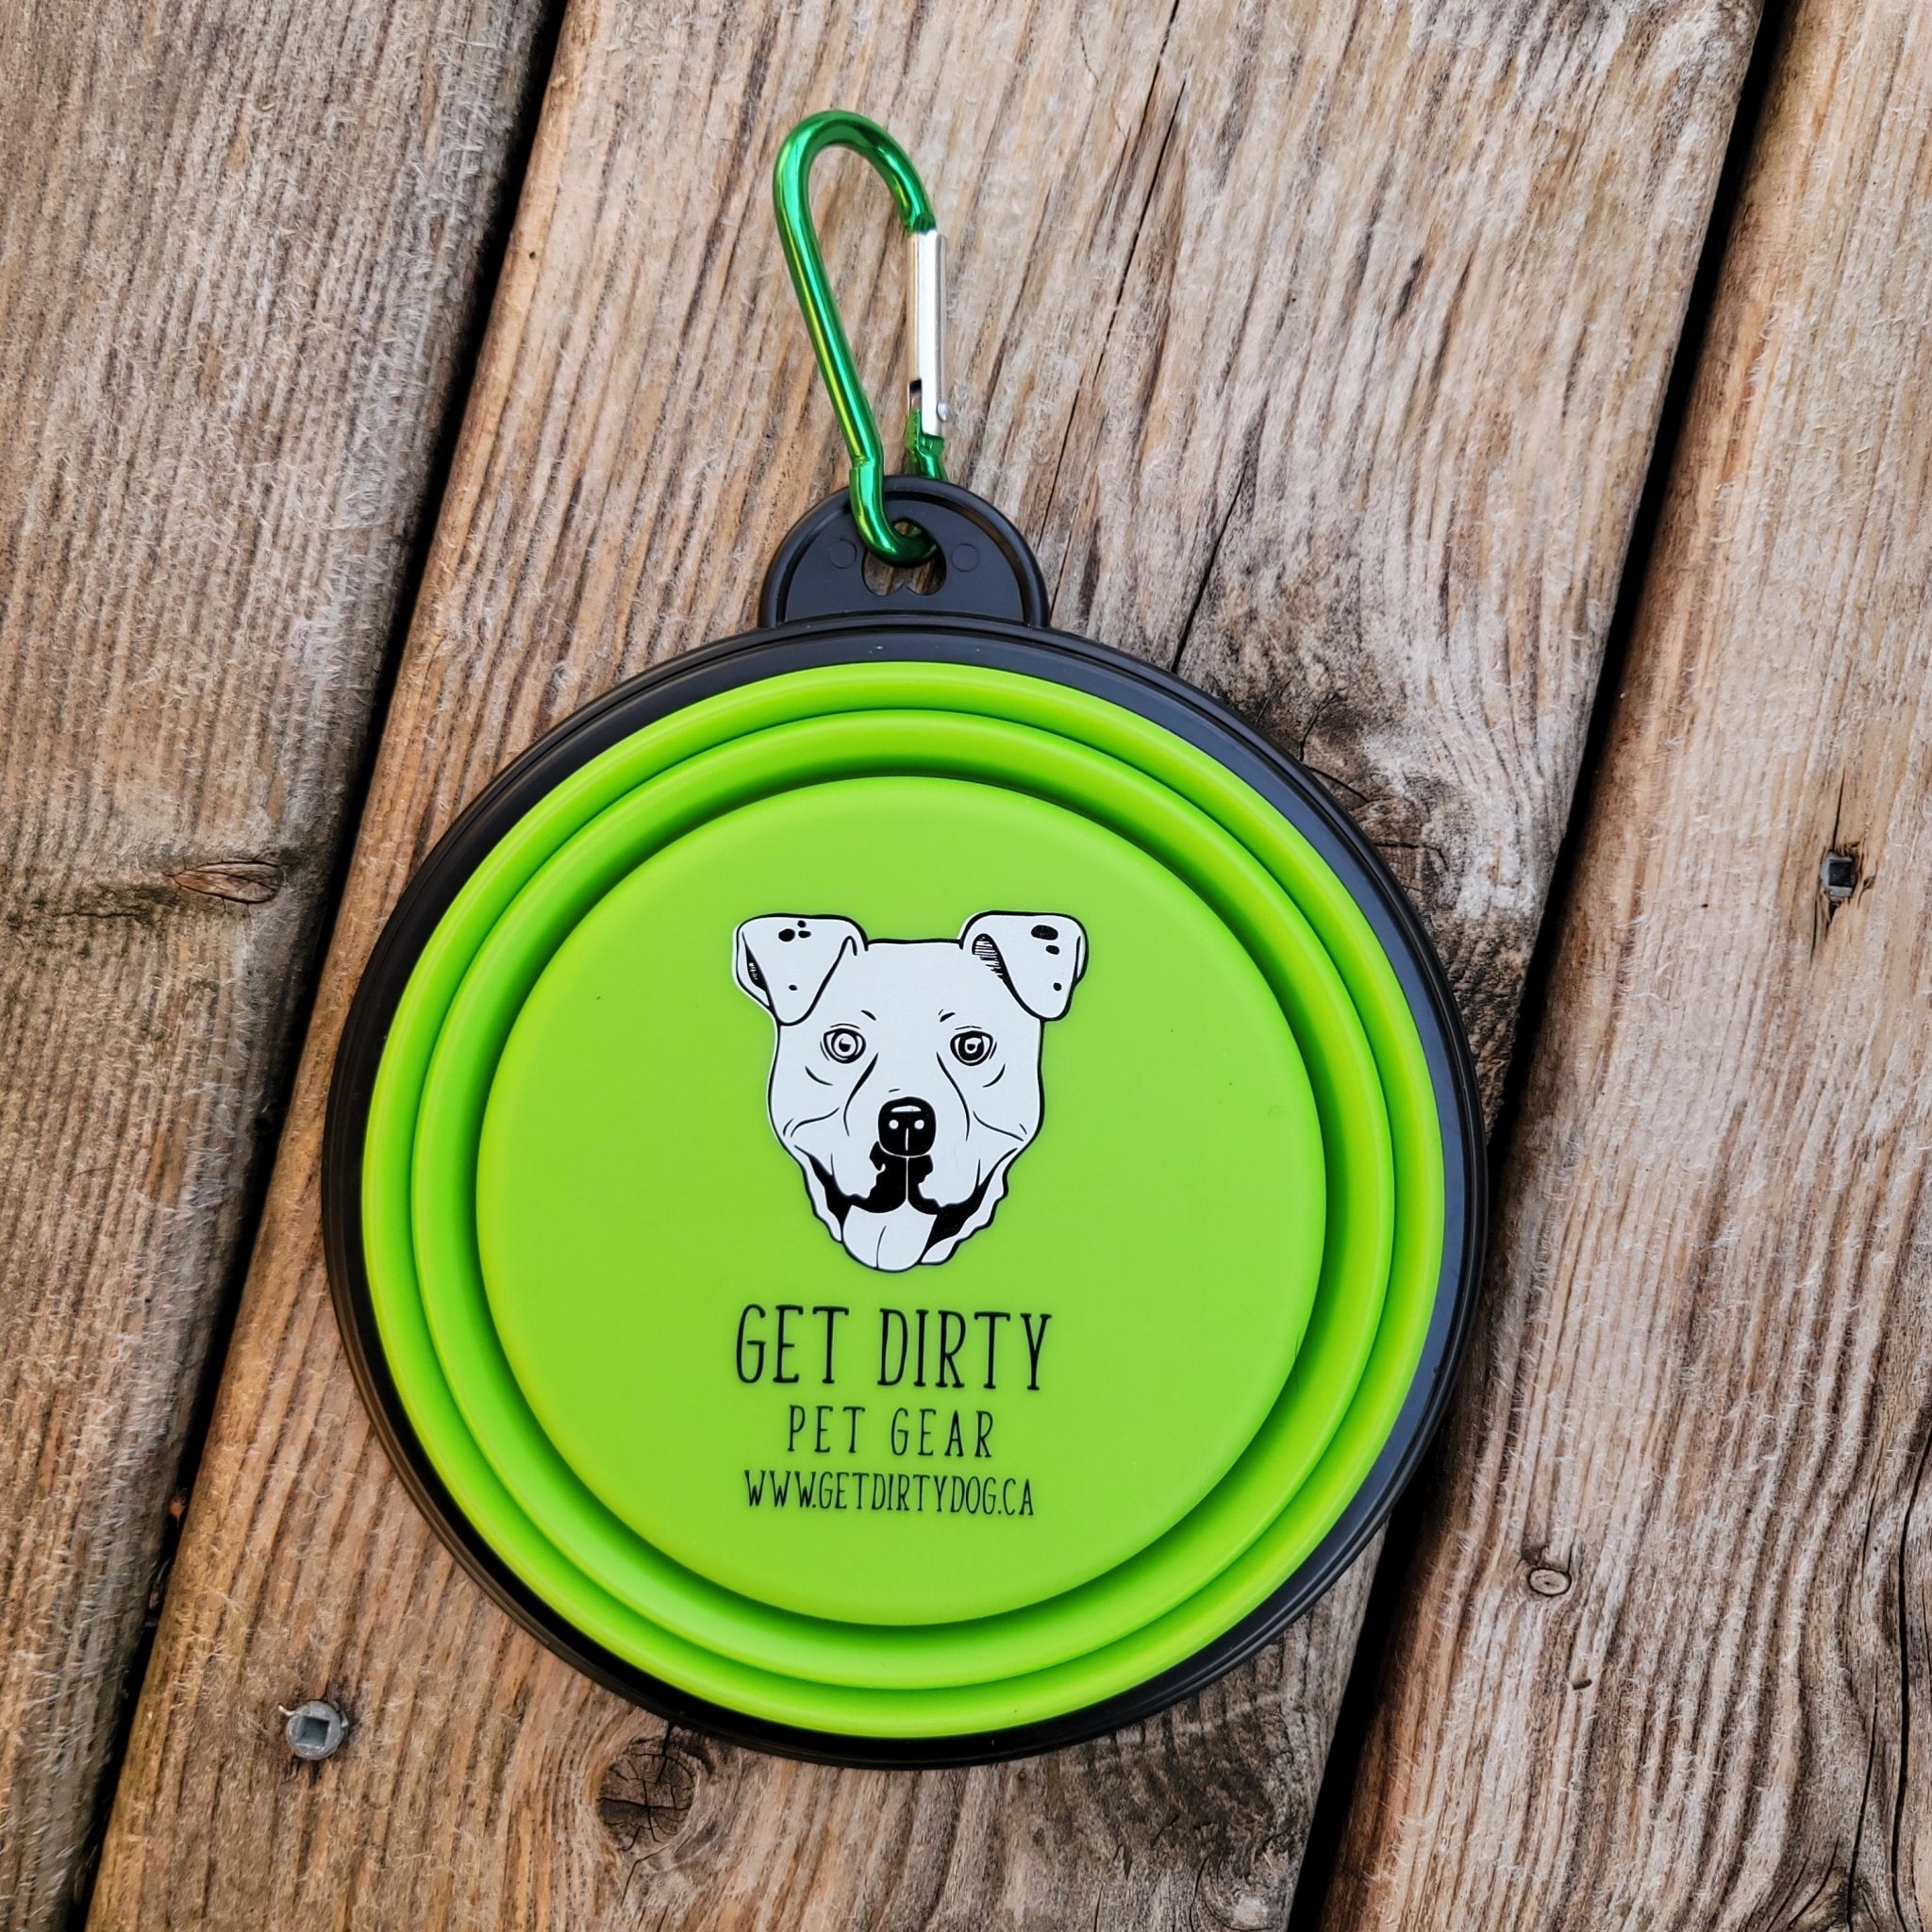 Get Dirty Collapsible Bowl - Get Dirty Pet Gear